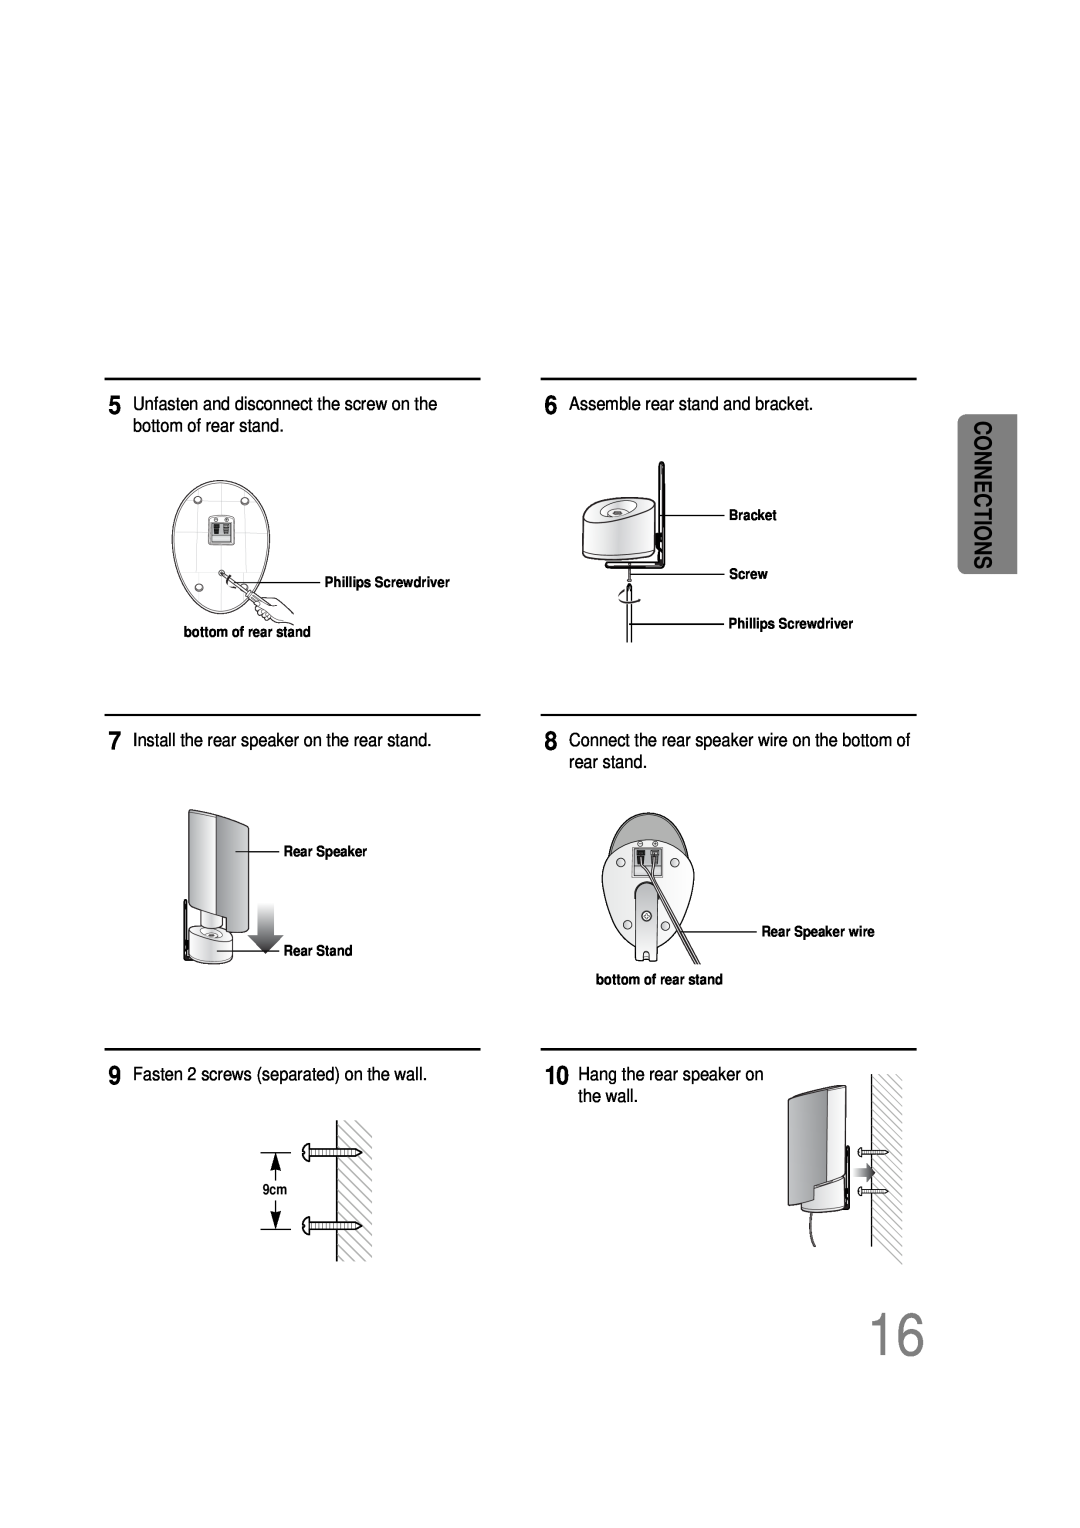 Samsung AH68-01493X, HT-DS665T instruction manual Connections, Unfasten and disconnect the screw on the bottom of rear stand 